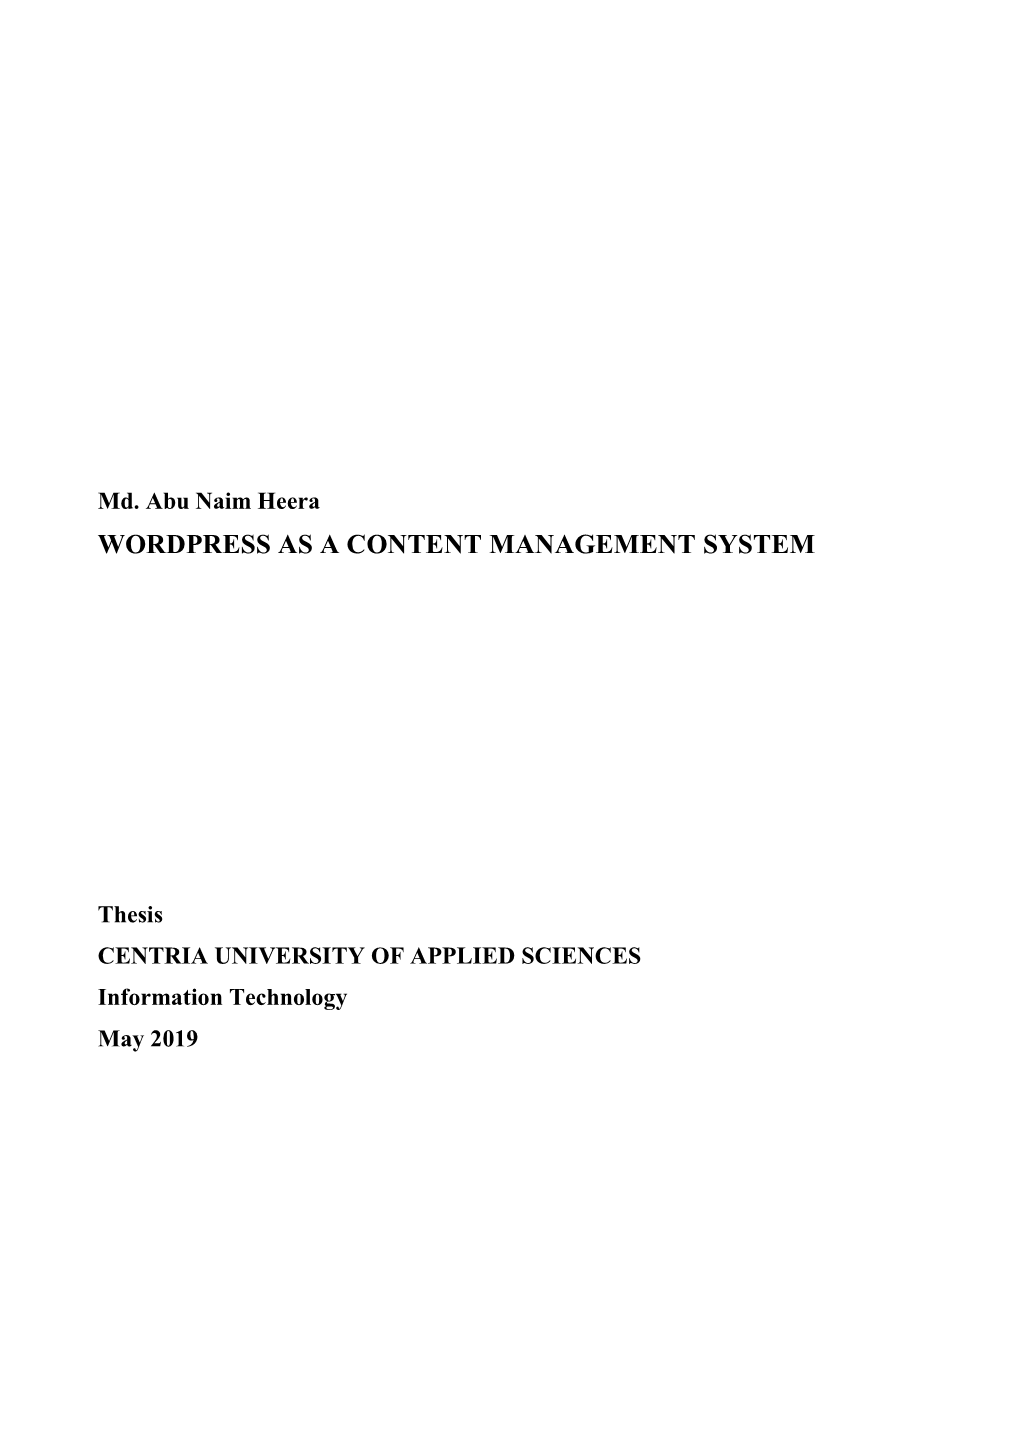 Wordpress As a Content Management System